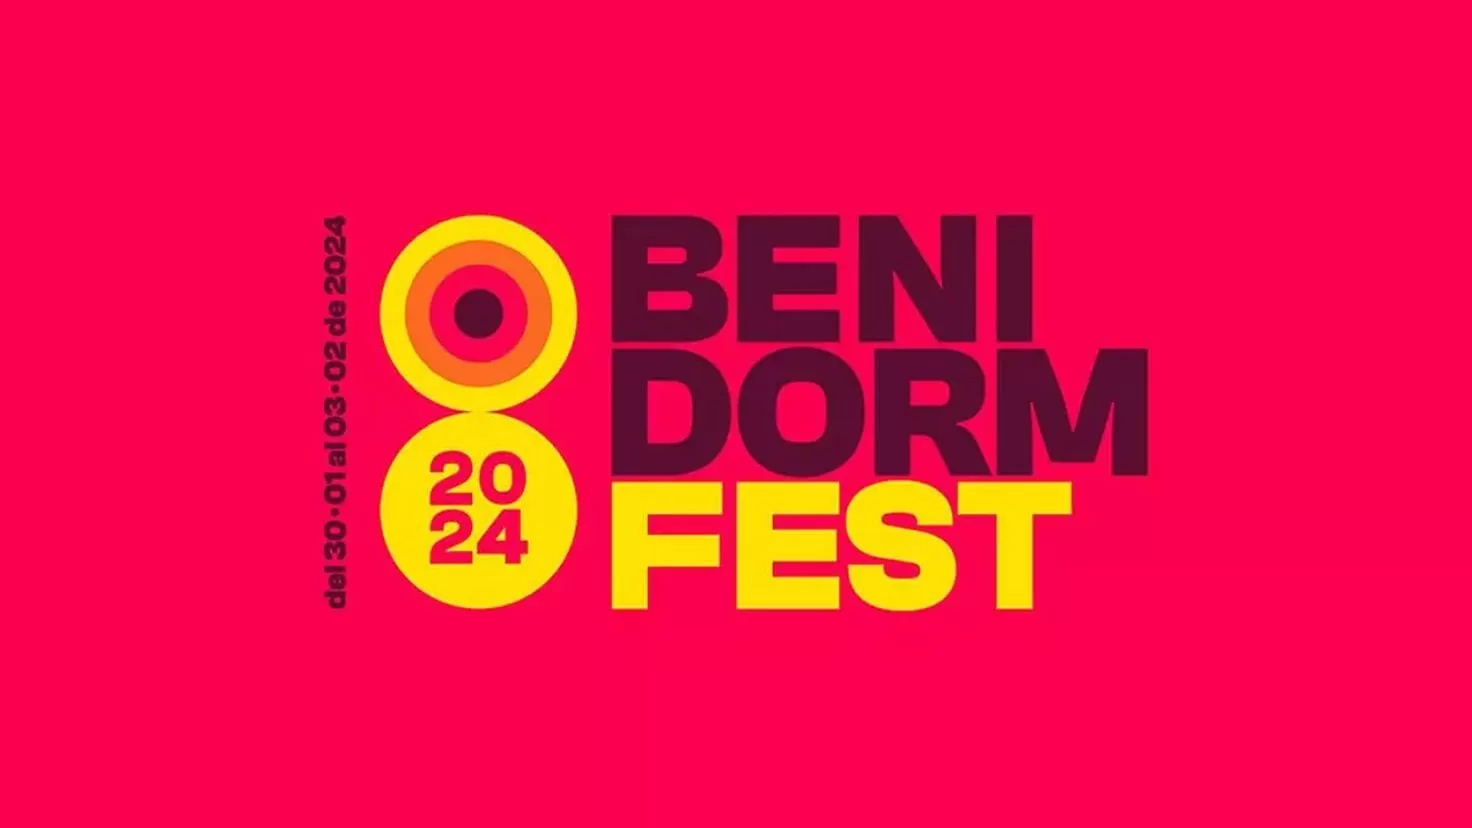  Do the Benidorm Fest songs have to be in Spanish?  Festival language requirements
